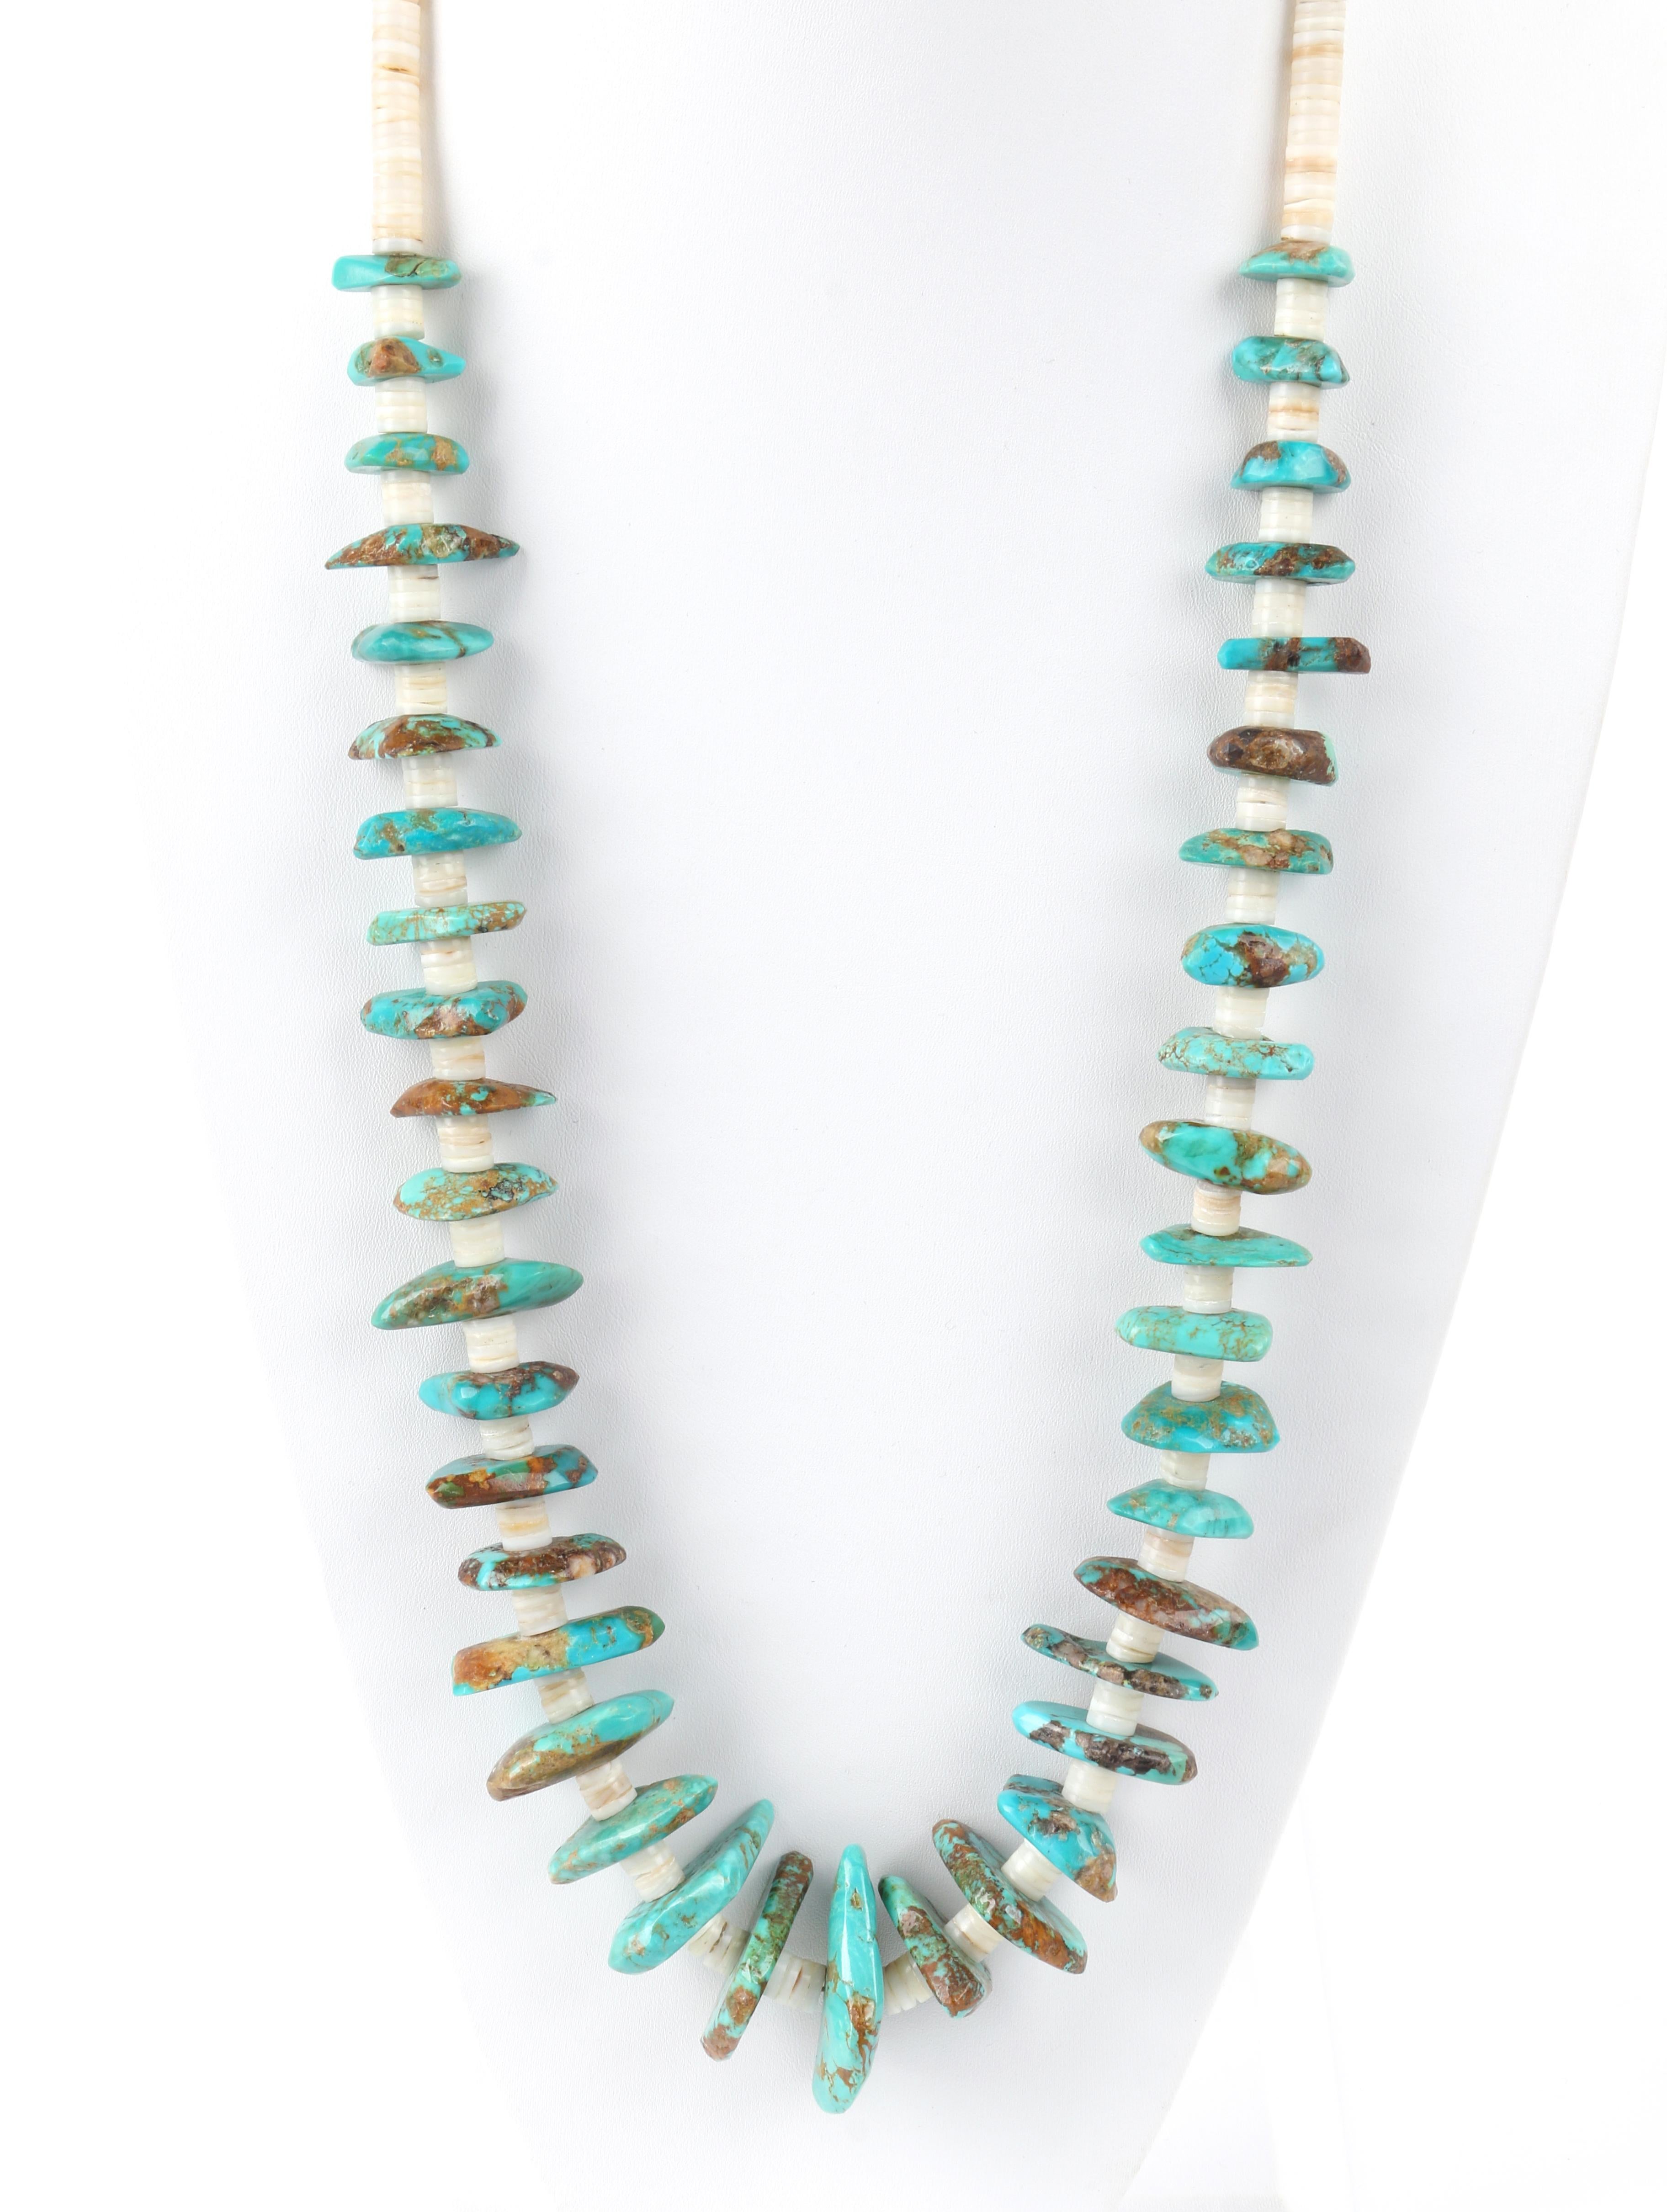 c.1970’s Navajo Turquoise Stone Ivory Pen Shell Heishi Bead Long Strand Necklace
 
Circa: 1970’s 
Style: Beaded necklace
Color(s): Shades of turquoise, brown, tan, and ivory
Unmarked Material (feel of): Turquoise (stones); Pen Shells (disc beads);